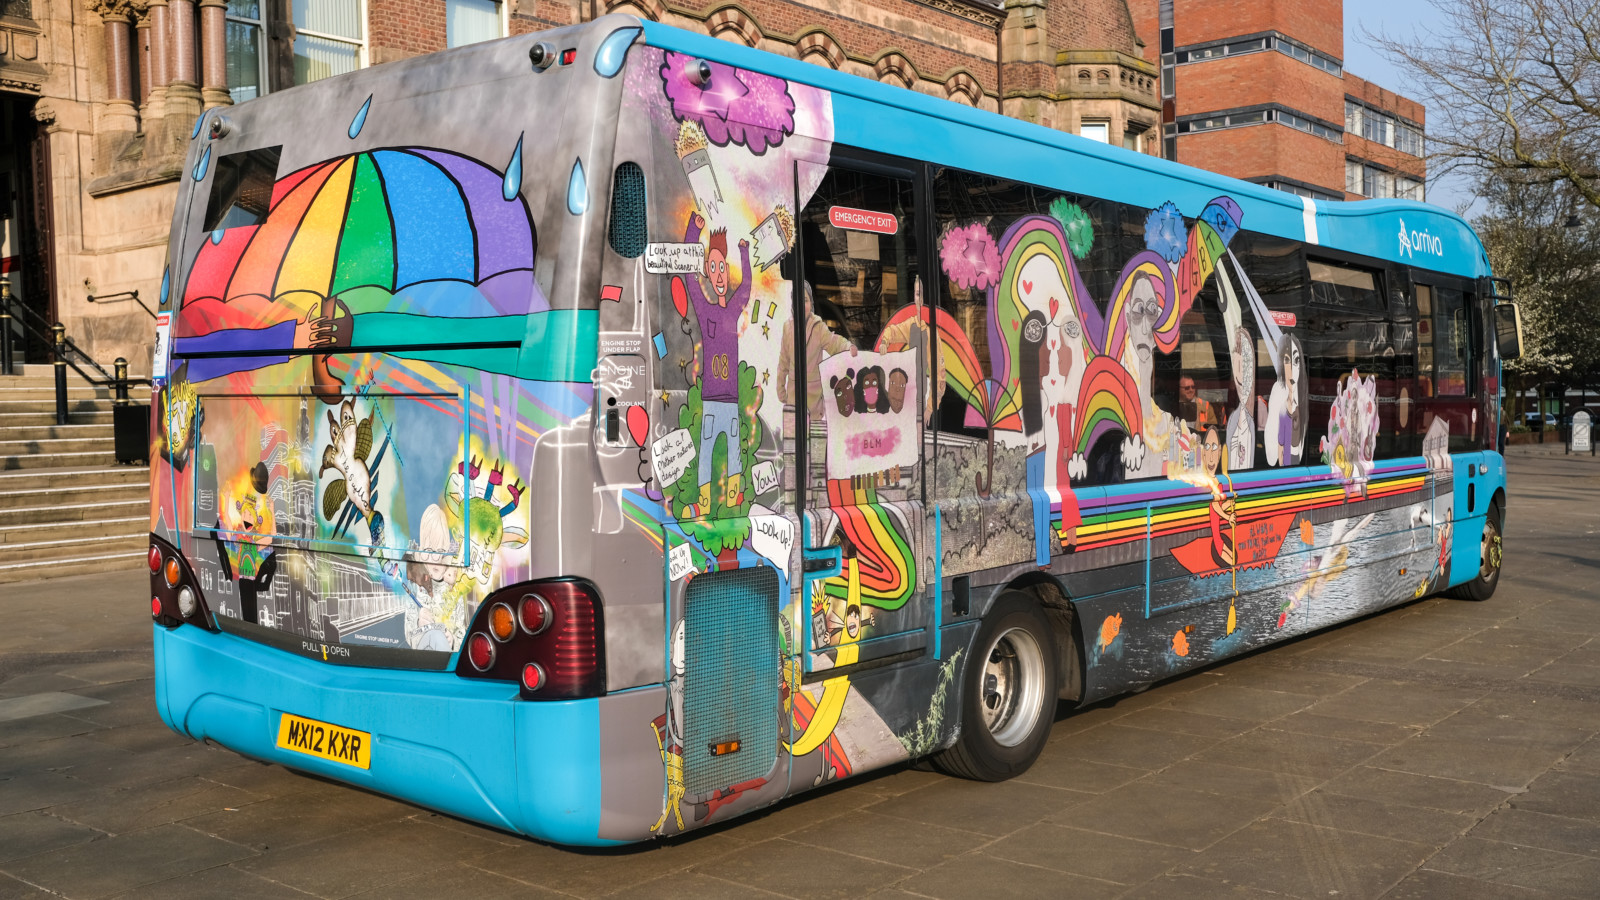 An Arriva bus is parked in front of St Helens Town Hall. The bus is decorated with brightly coloured illustrations and designs. The rear of the bus has a large rainbow coloured umbrella.